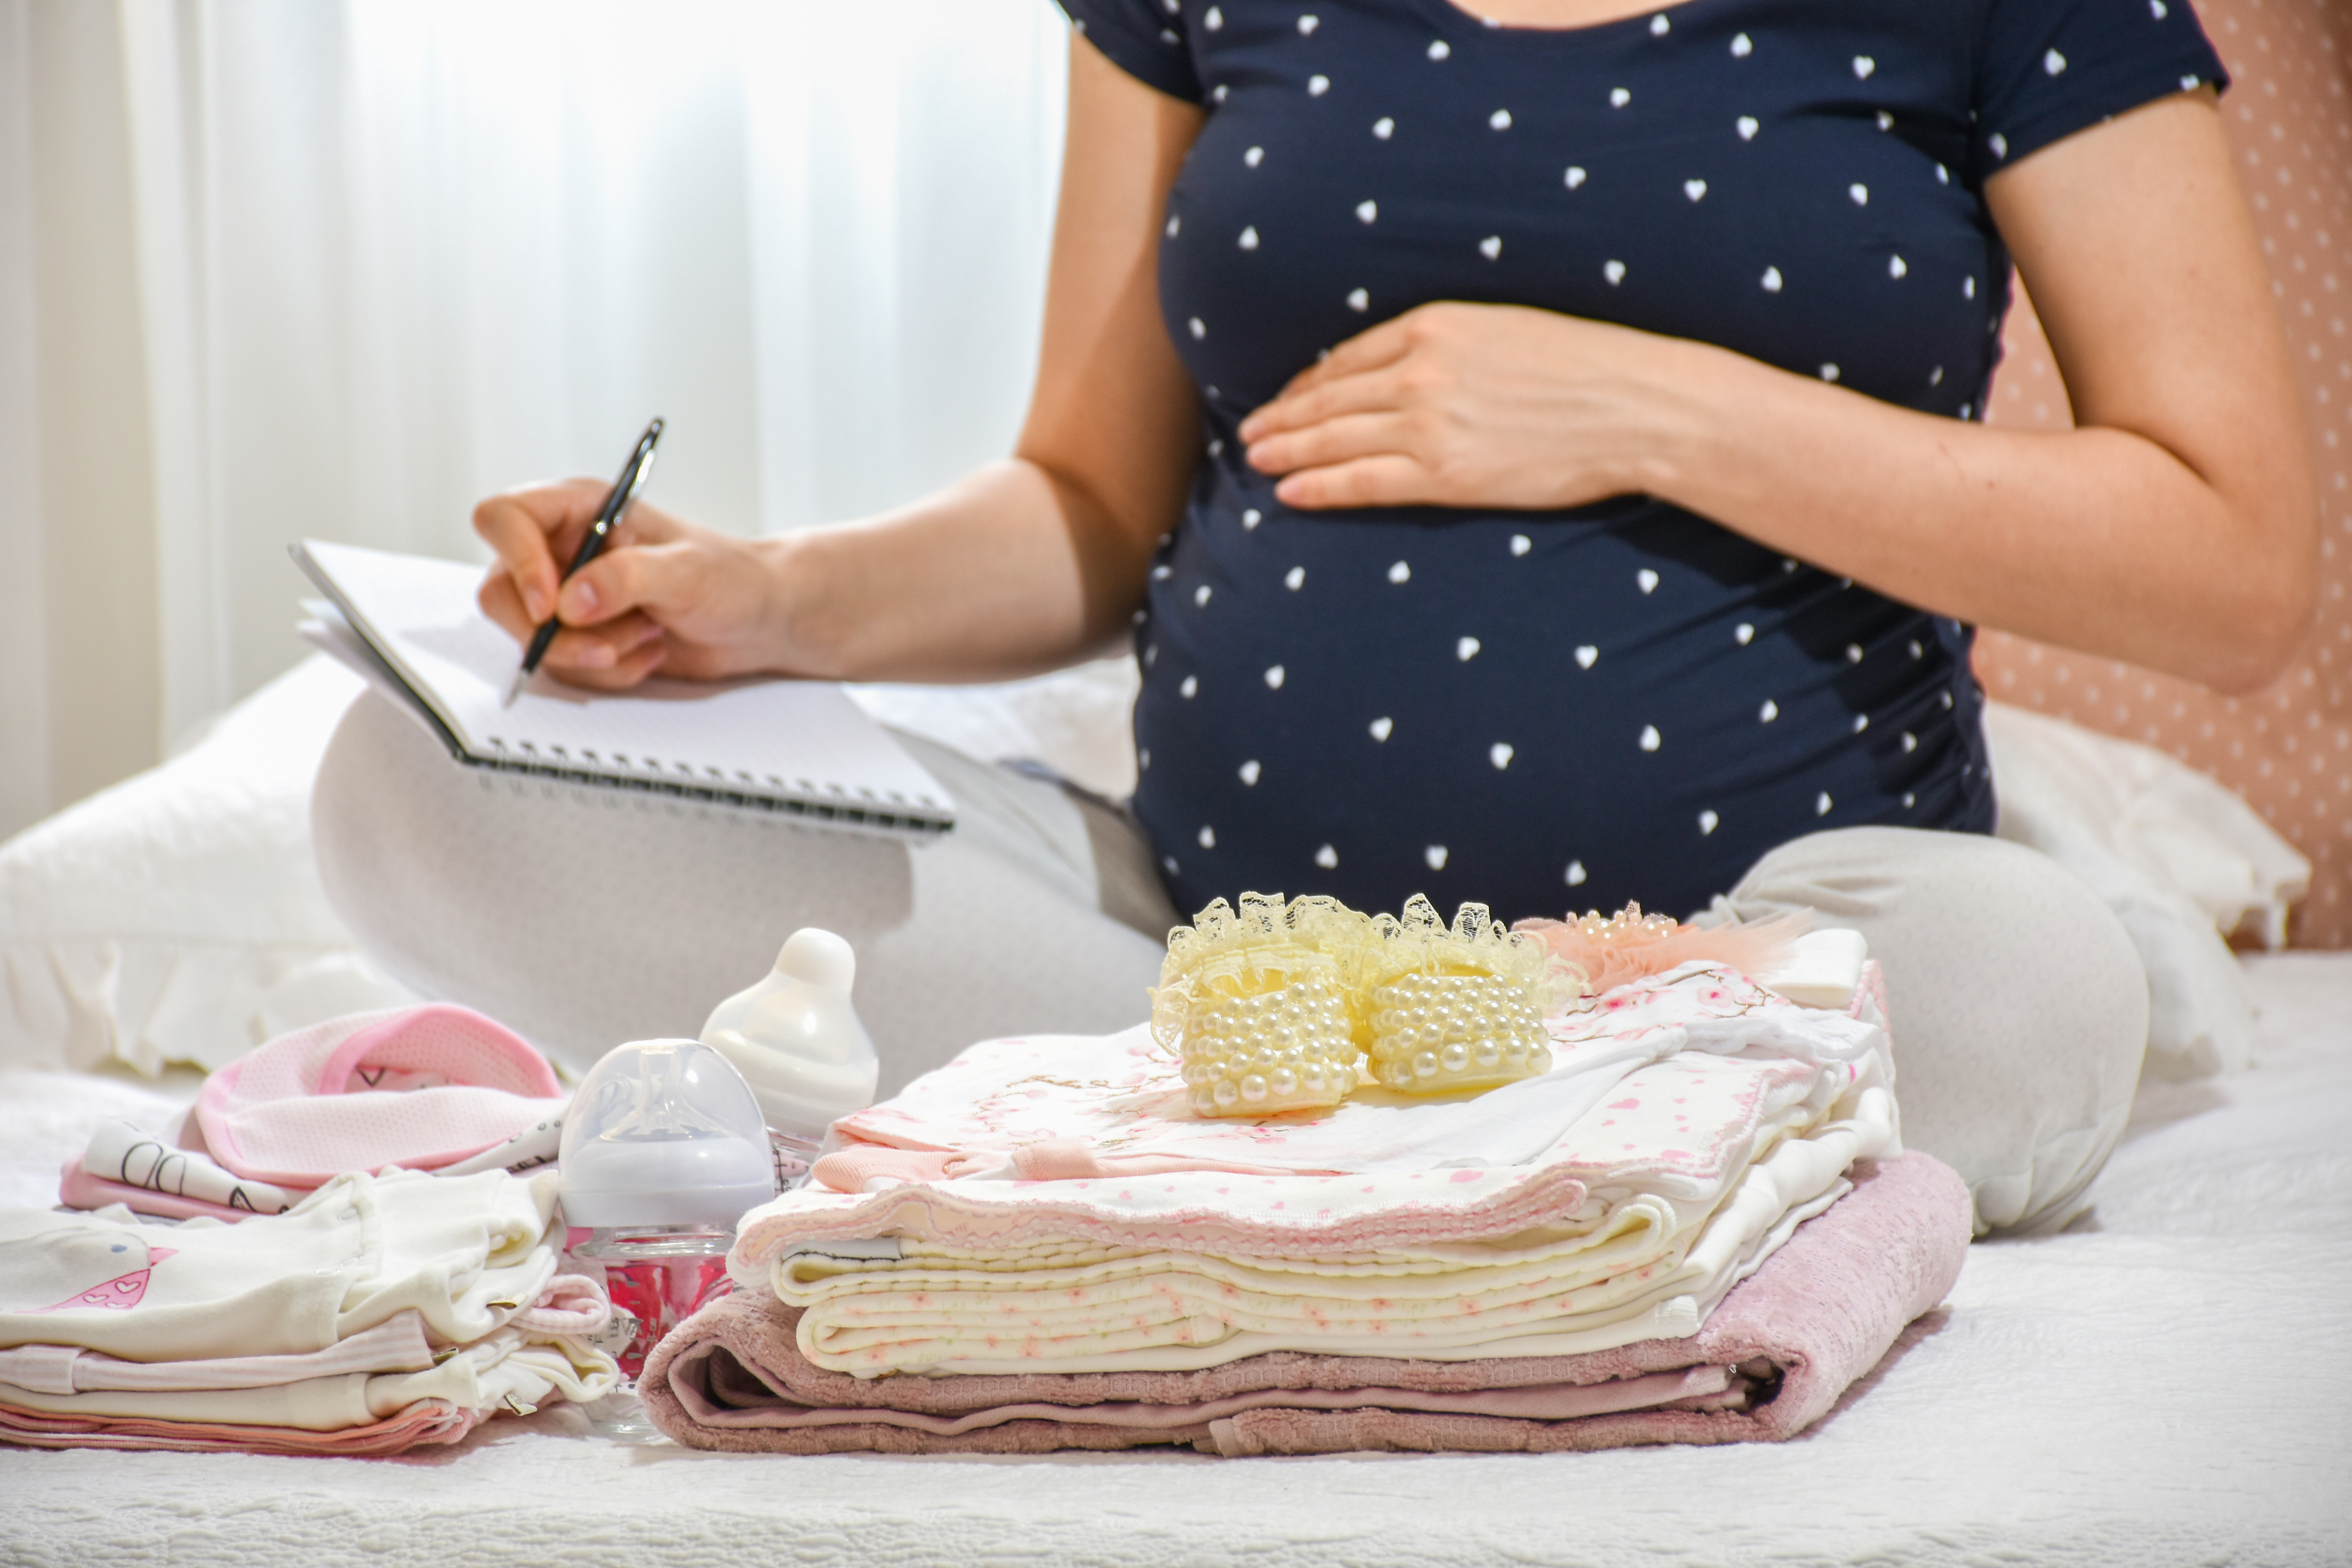 A pregnant woman with baby clothes in front of her | Source: Shutterstock